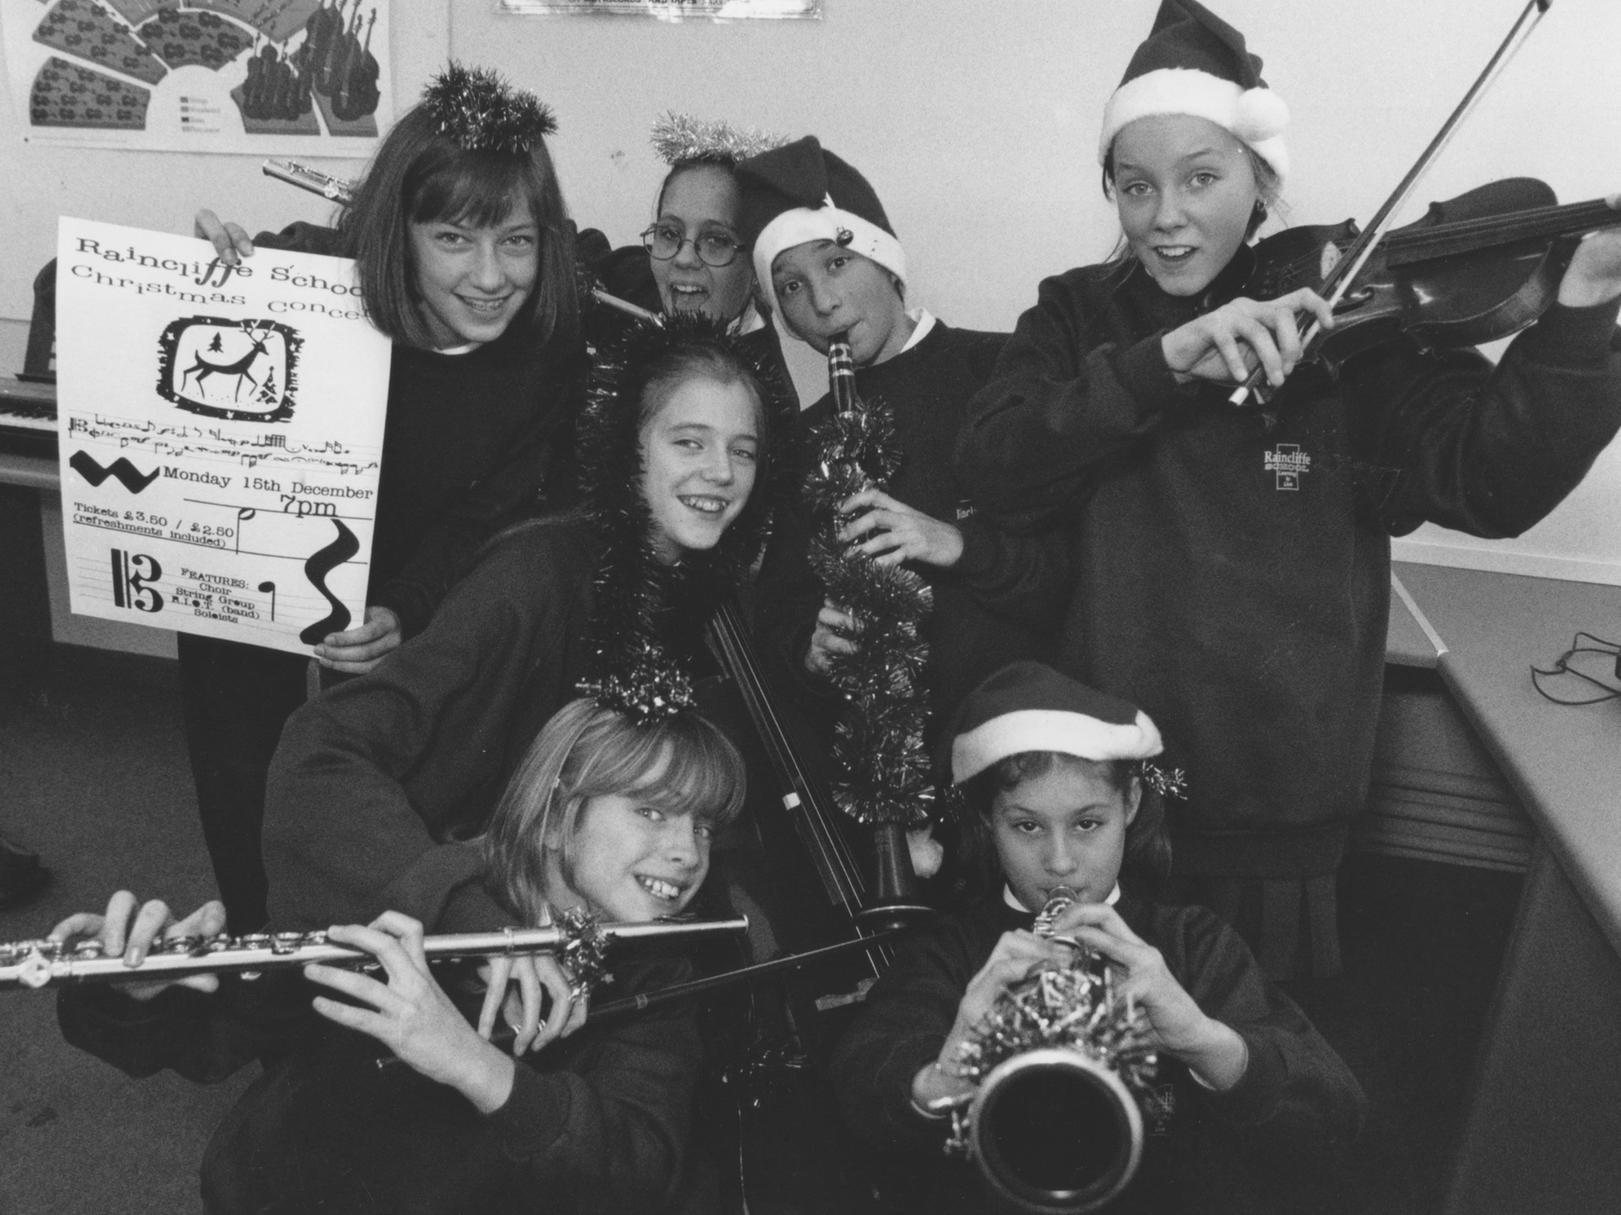 These young musicians get ready for Raincliffe School's Christmas concert in December 1997. Pictured from left, standing, Melissa Syers, Gemma Hay, Joel Mainprize, Amy Bull; front Jade Bull, Holly Missin and Elizabeth Alexander.